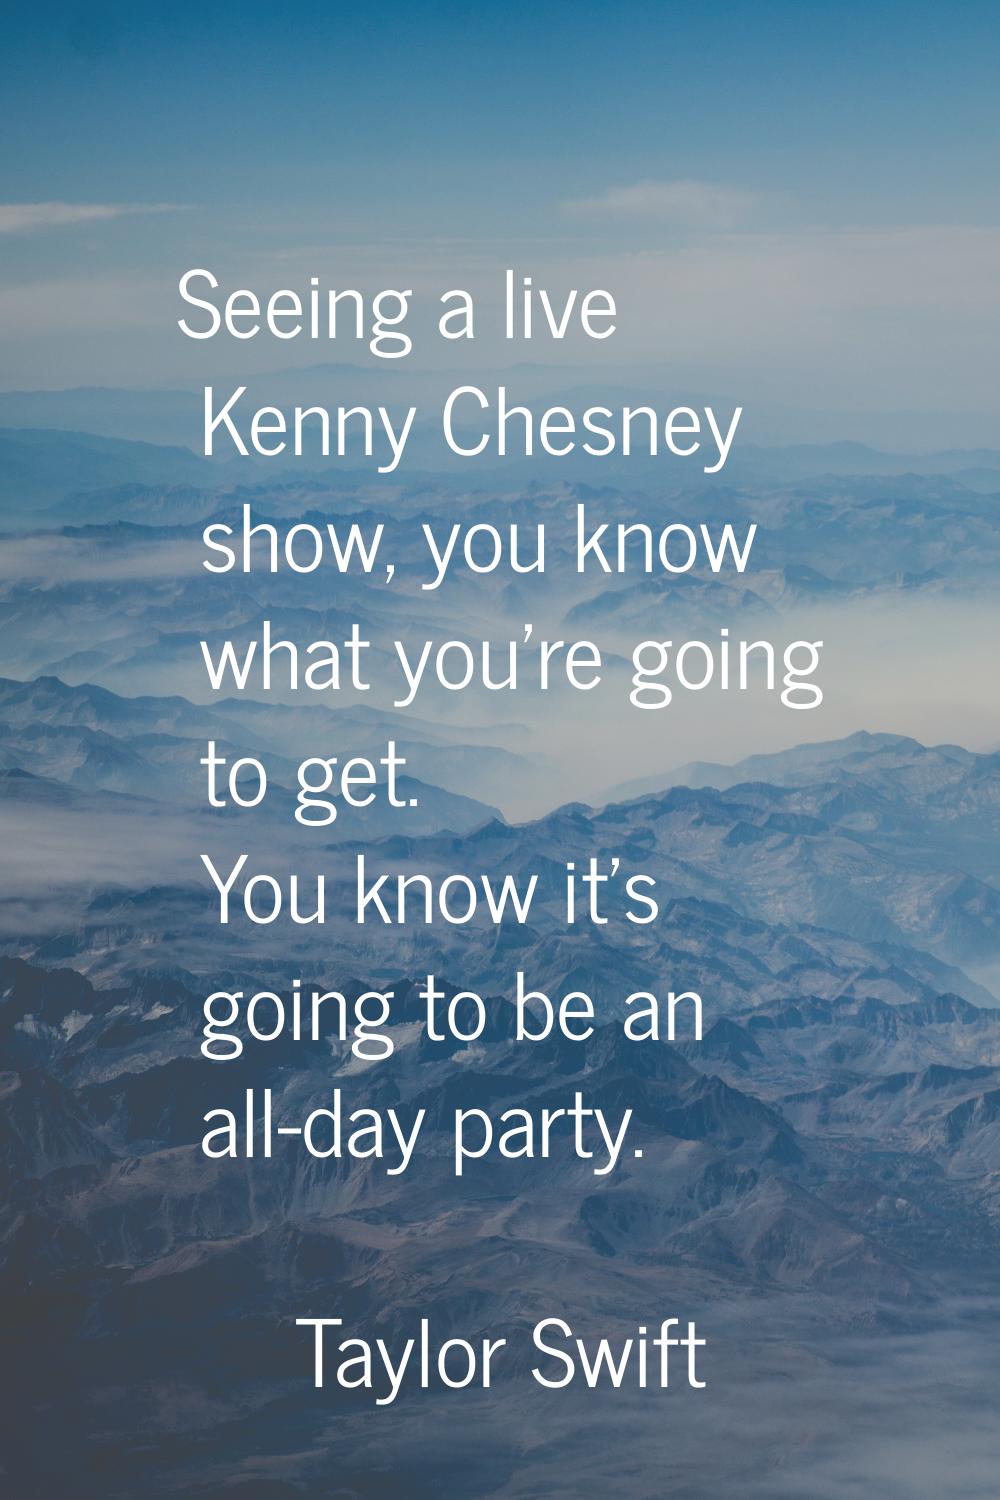 Seeing a live Kenny Chesney show, you know what you're going to get. You know it's going to be an a